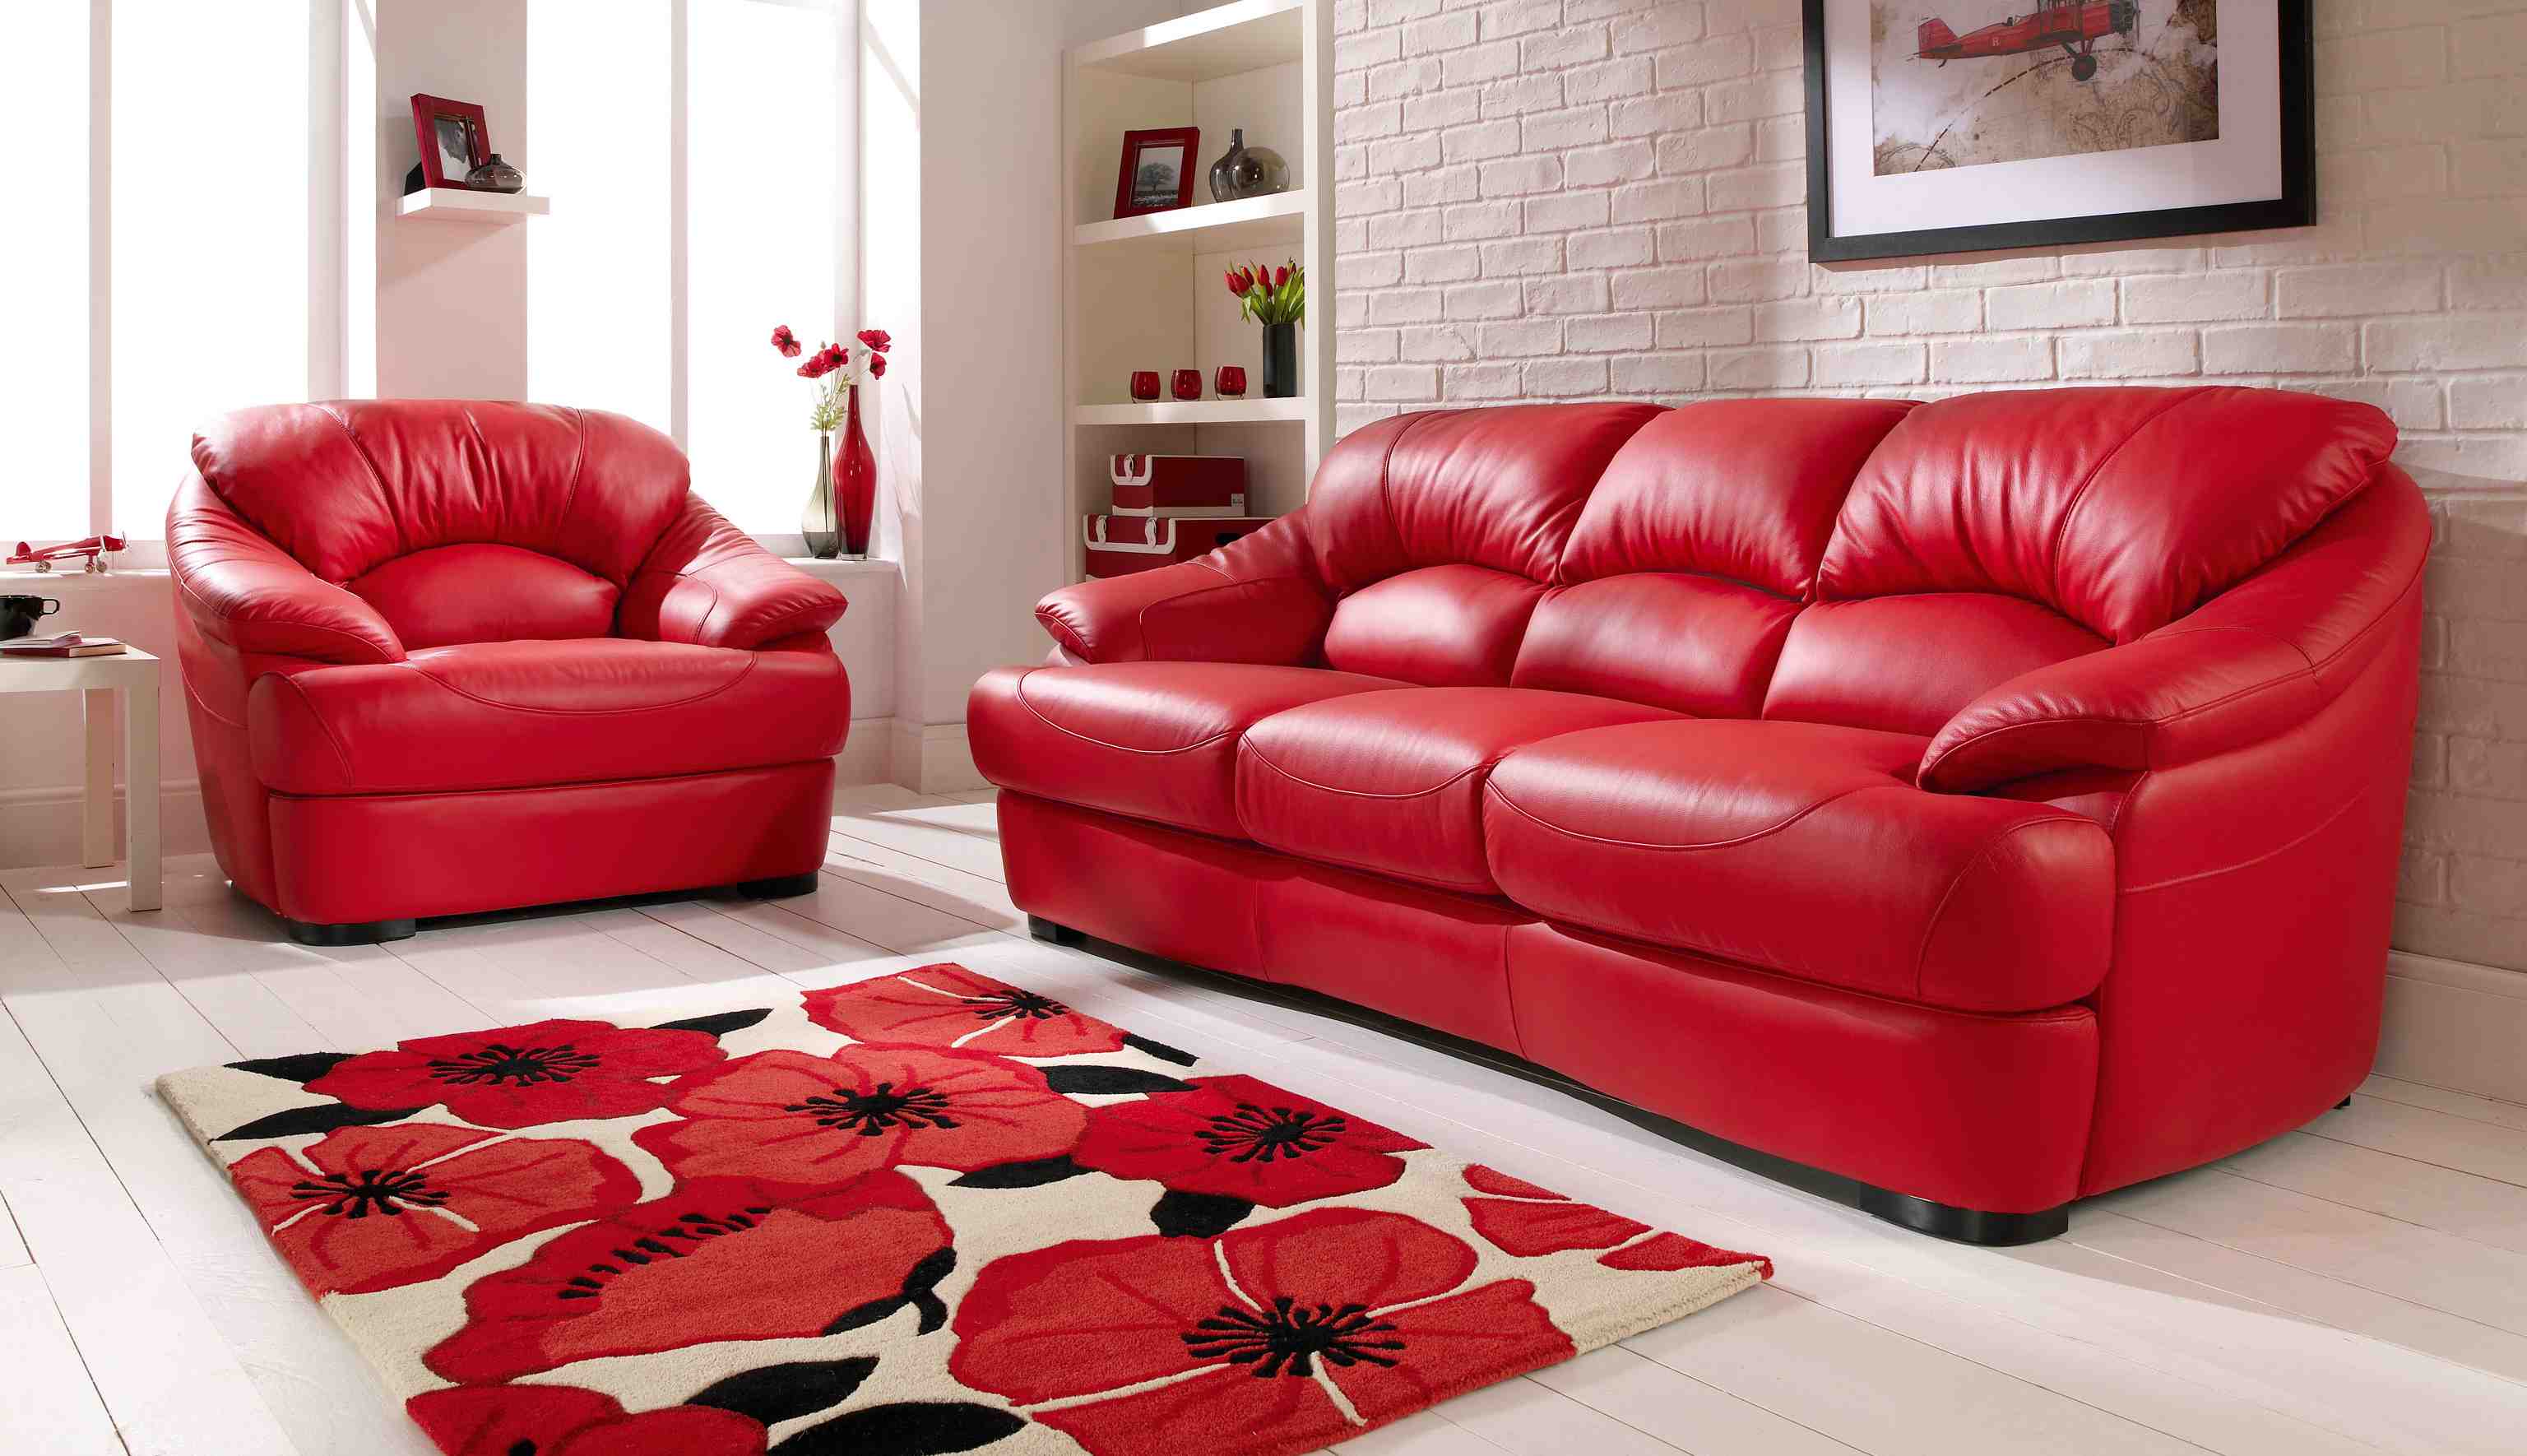 Modern Living Crimson Wonderful Modern Living Room With Crimson Red Leather Sofa White Wooden Floor And Several White Colored Wooden Shelf  Outstanding Living Room Furnished With A Red Leather Couch Or Sofa Sets